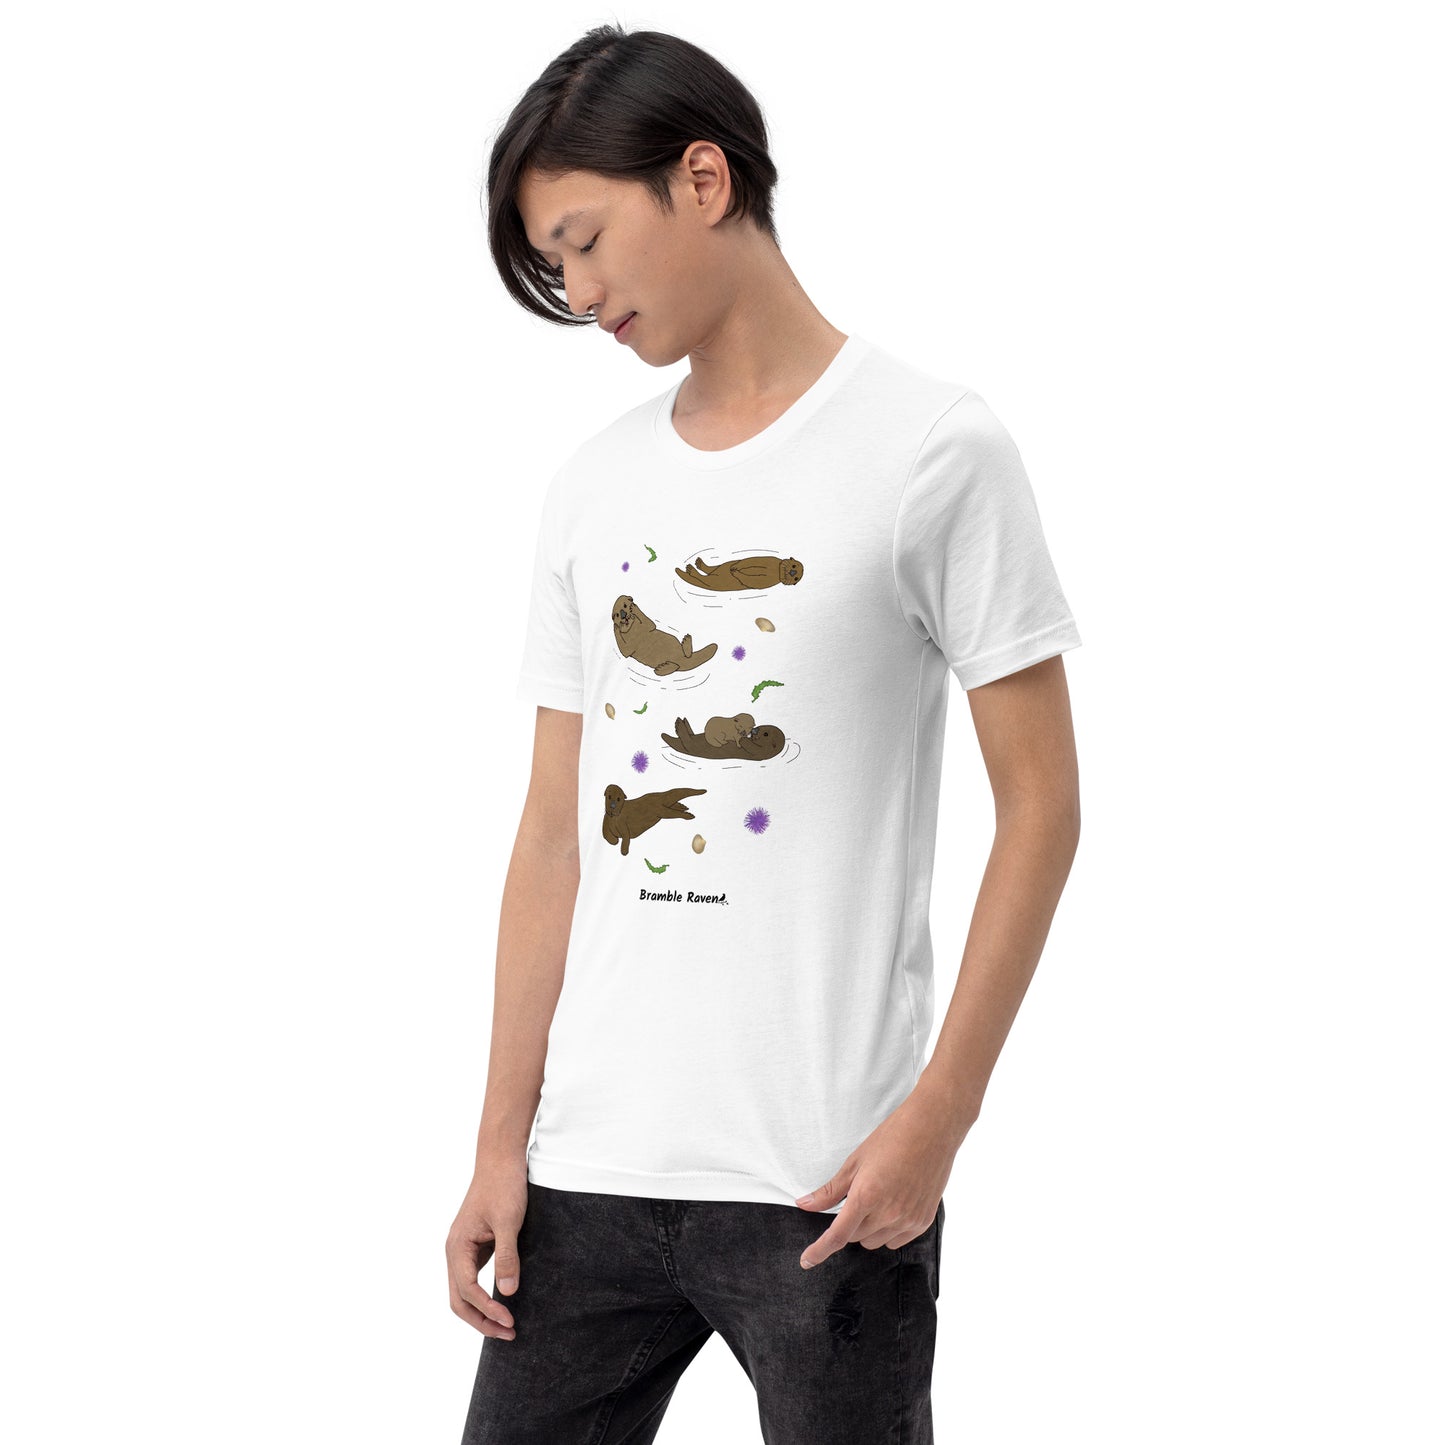 Unisex white colored t-shirt. Features four sea otters with seaweed, shells, and sea urchins. Shown on male model looking left.